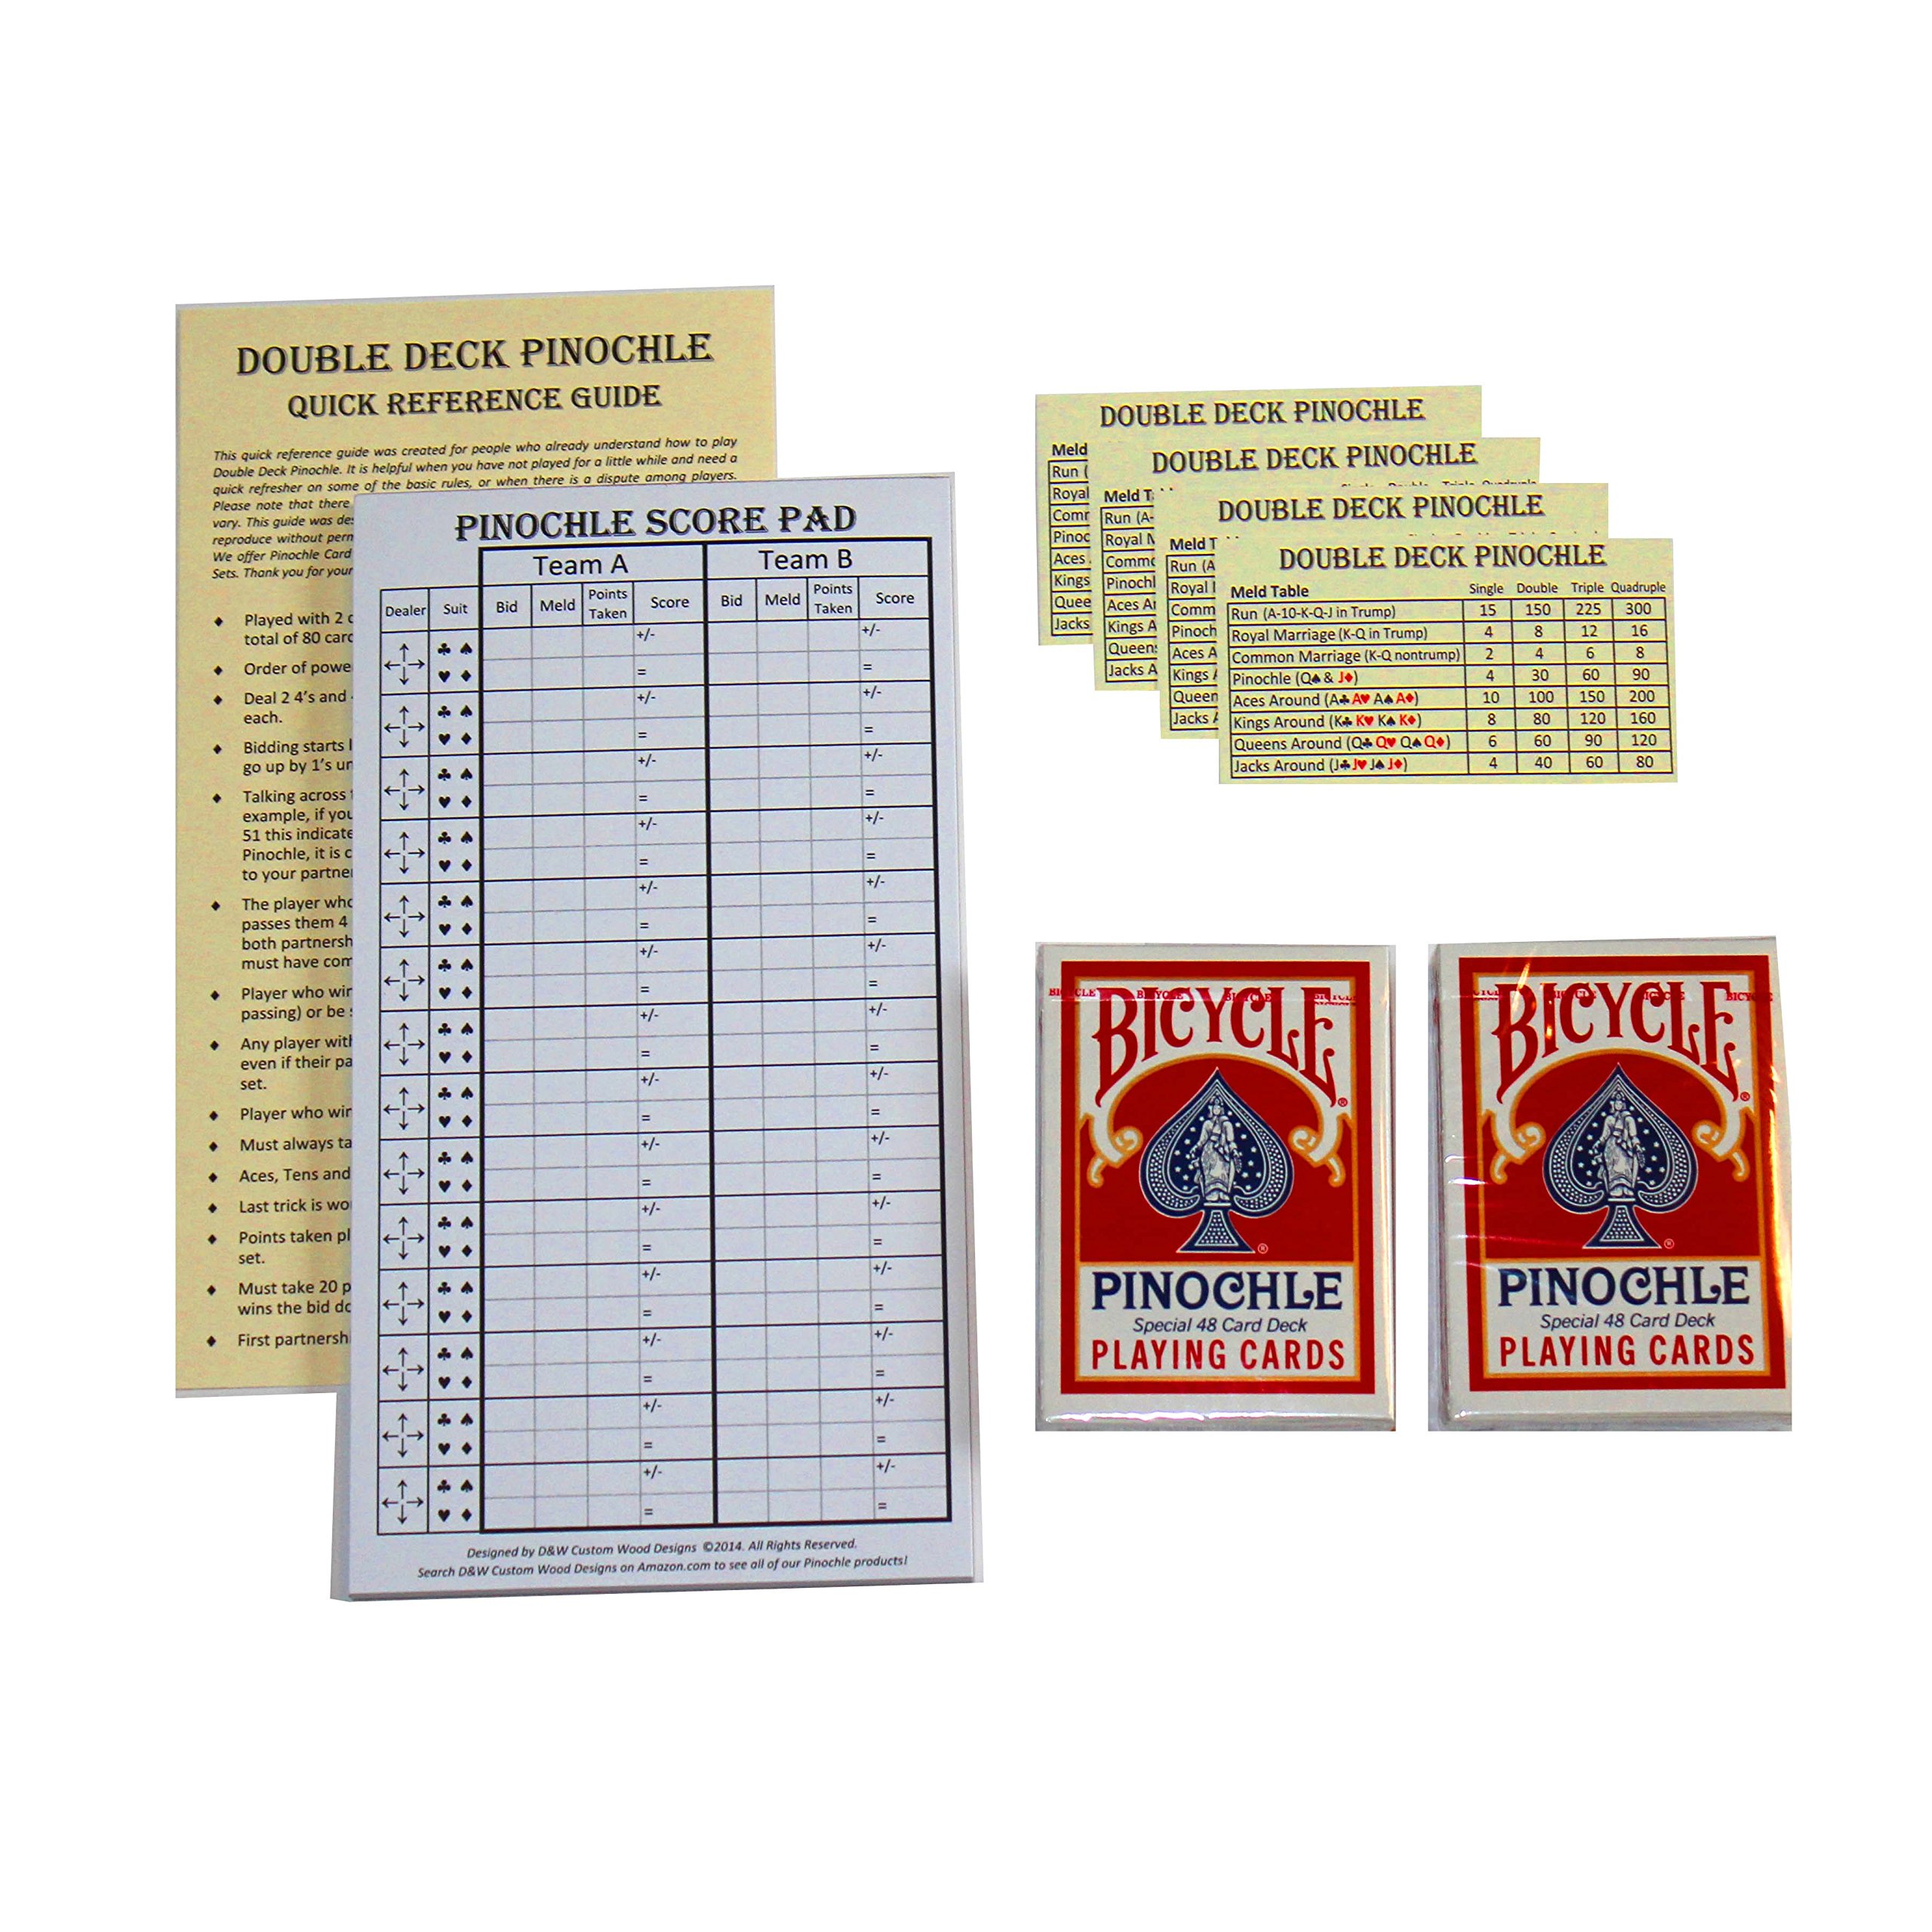 Book Cover D&W Custom Wood Designs Pinochle Score Pad Gift Set (Red): 40 Page Score Pad, Two Decks Red Bicycle Pinochle Playing Cards, Four Meld Tables and Double Pinochle Quick Reference Guide